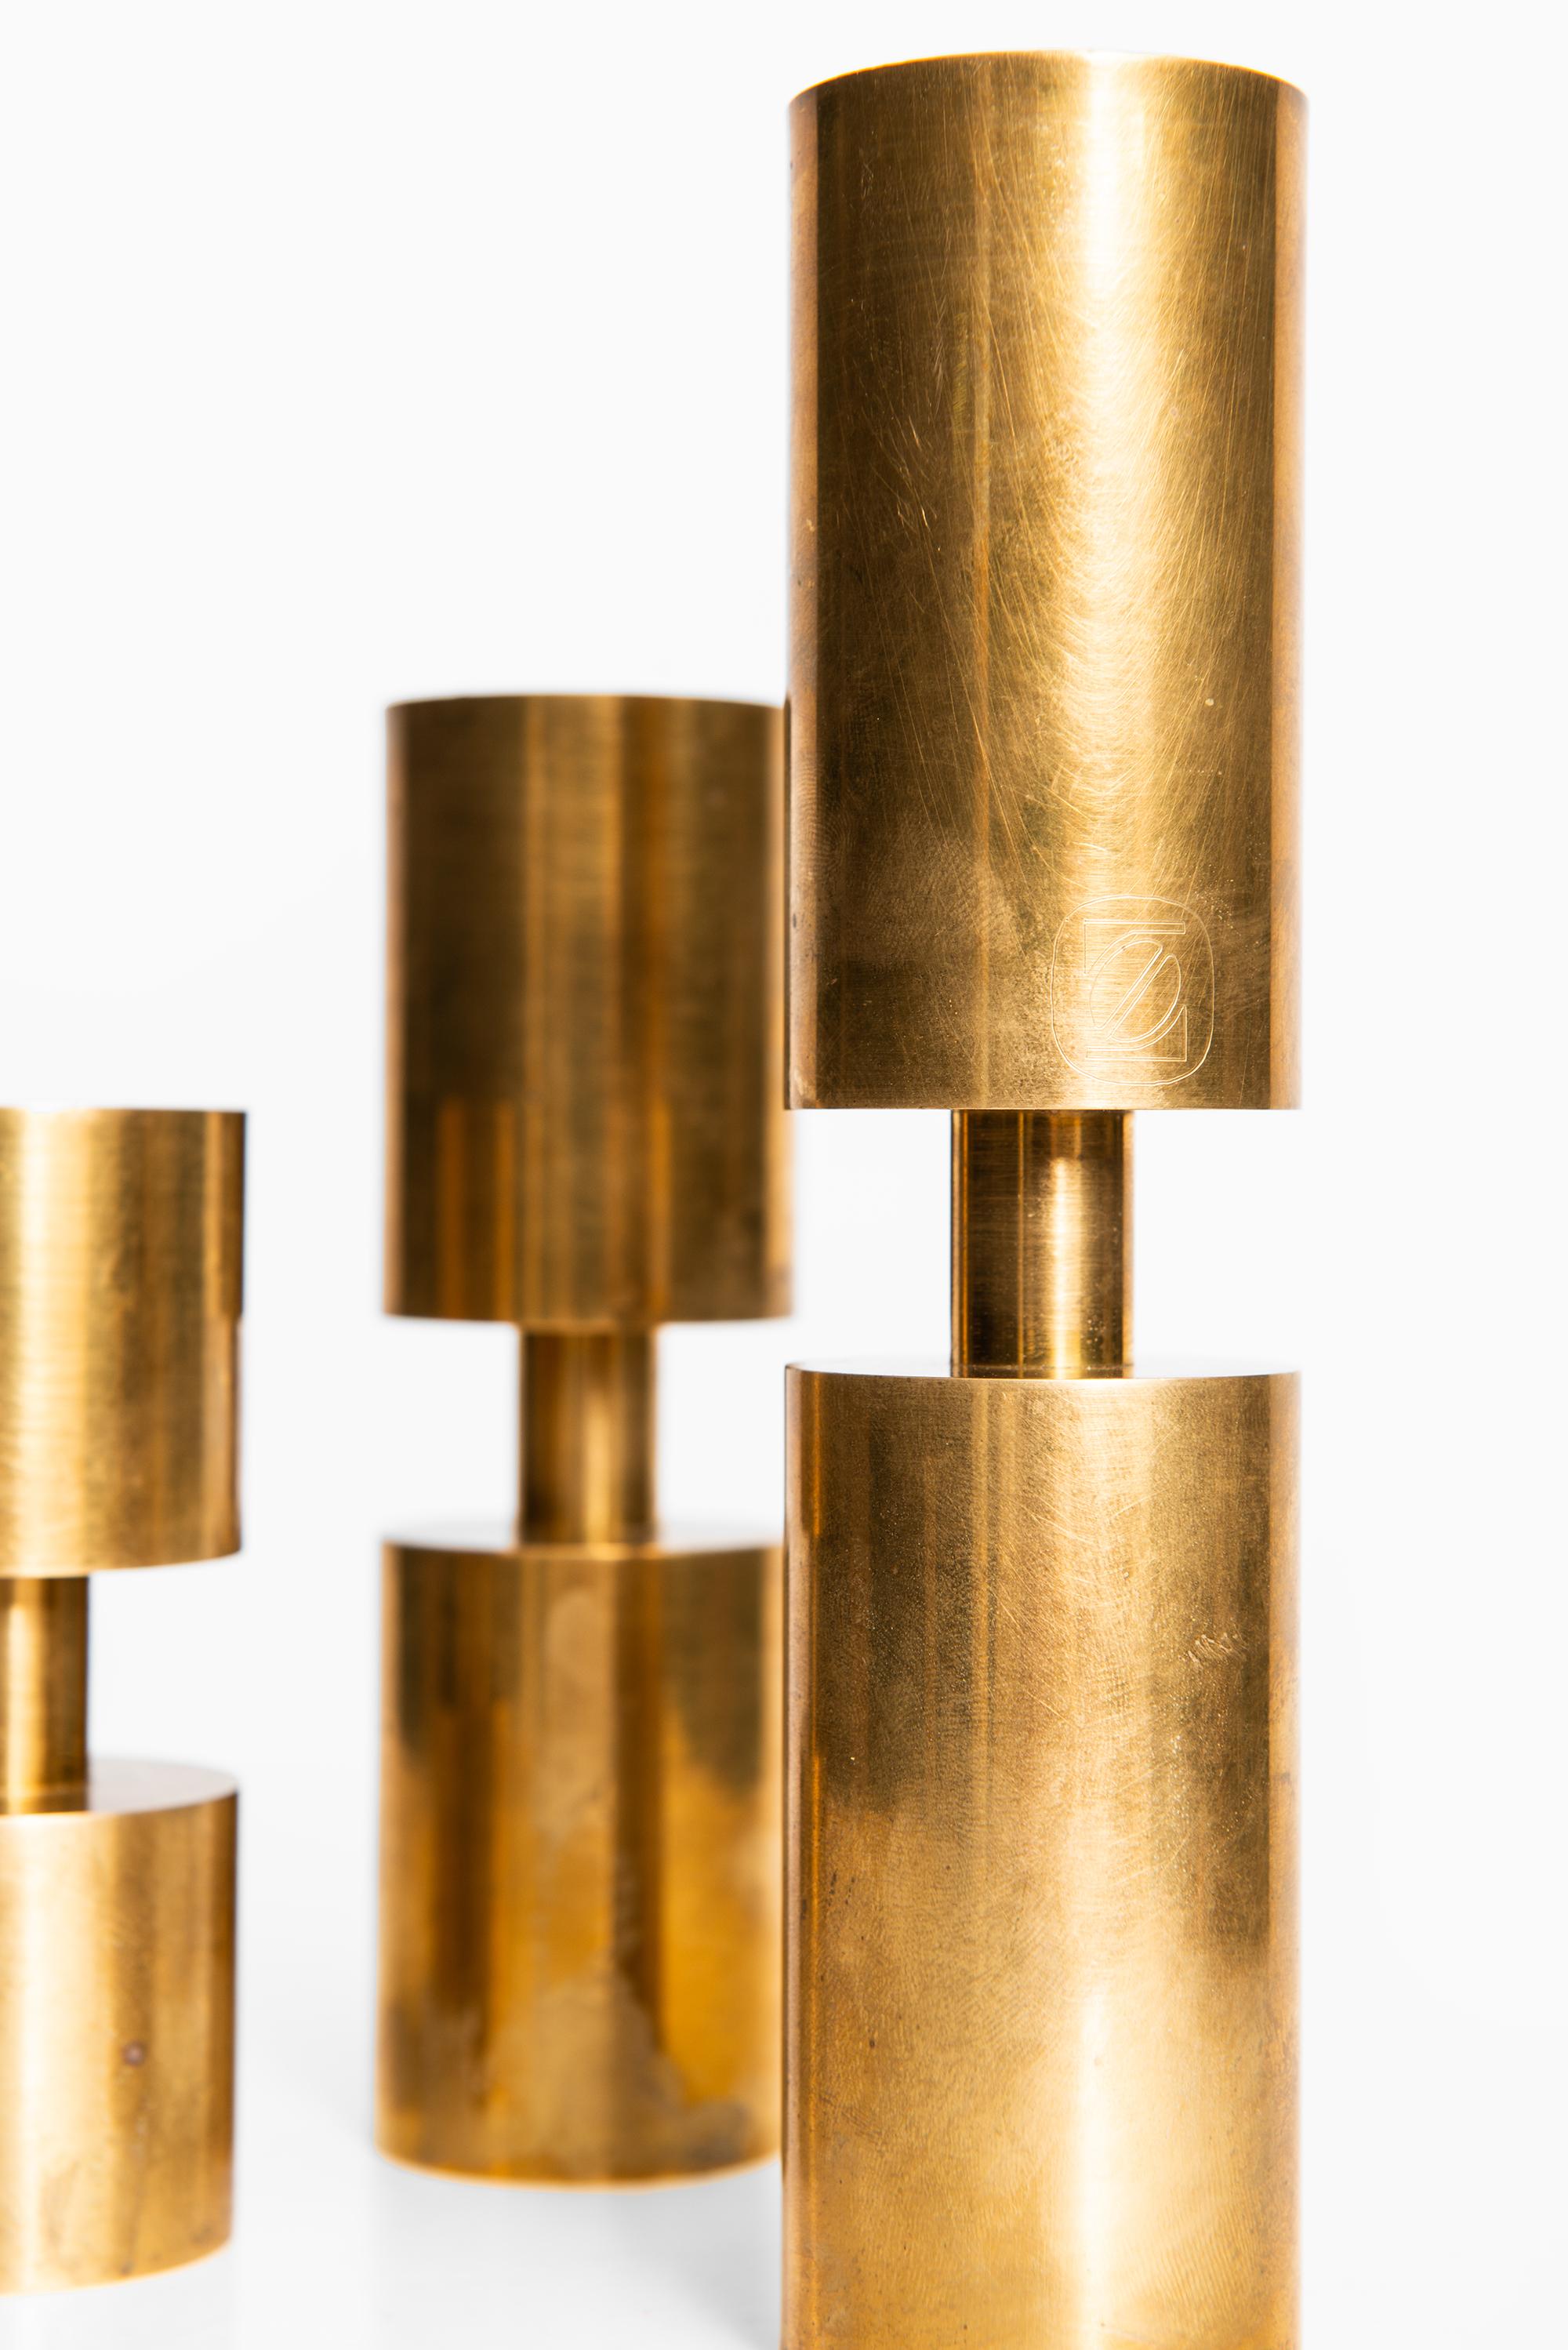 Set of 3 candlesticks designed by Thelma Zoéga. Produced in Sweden.